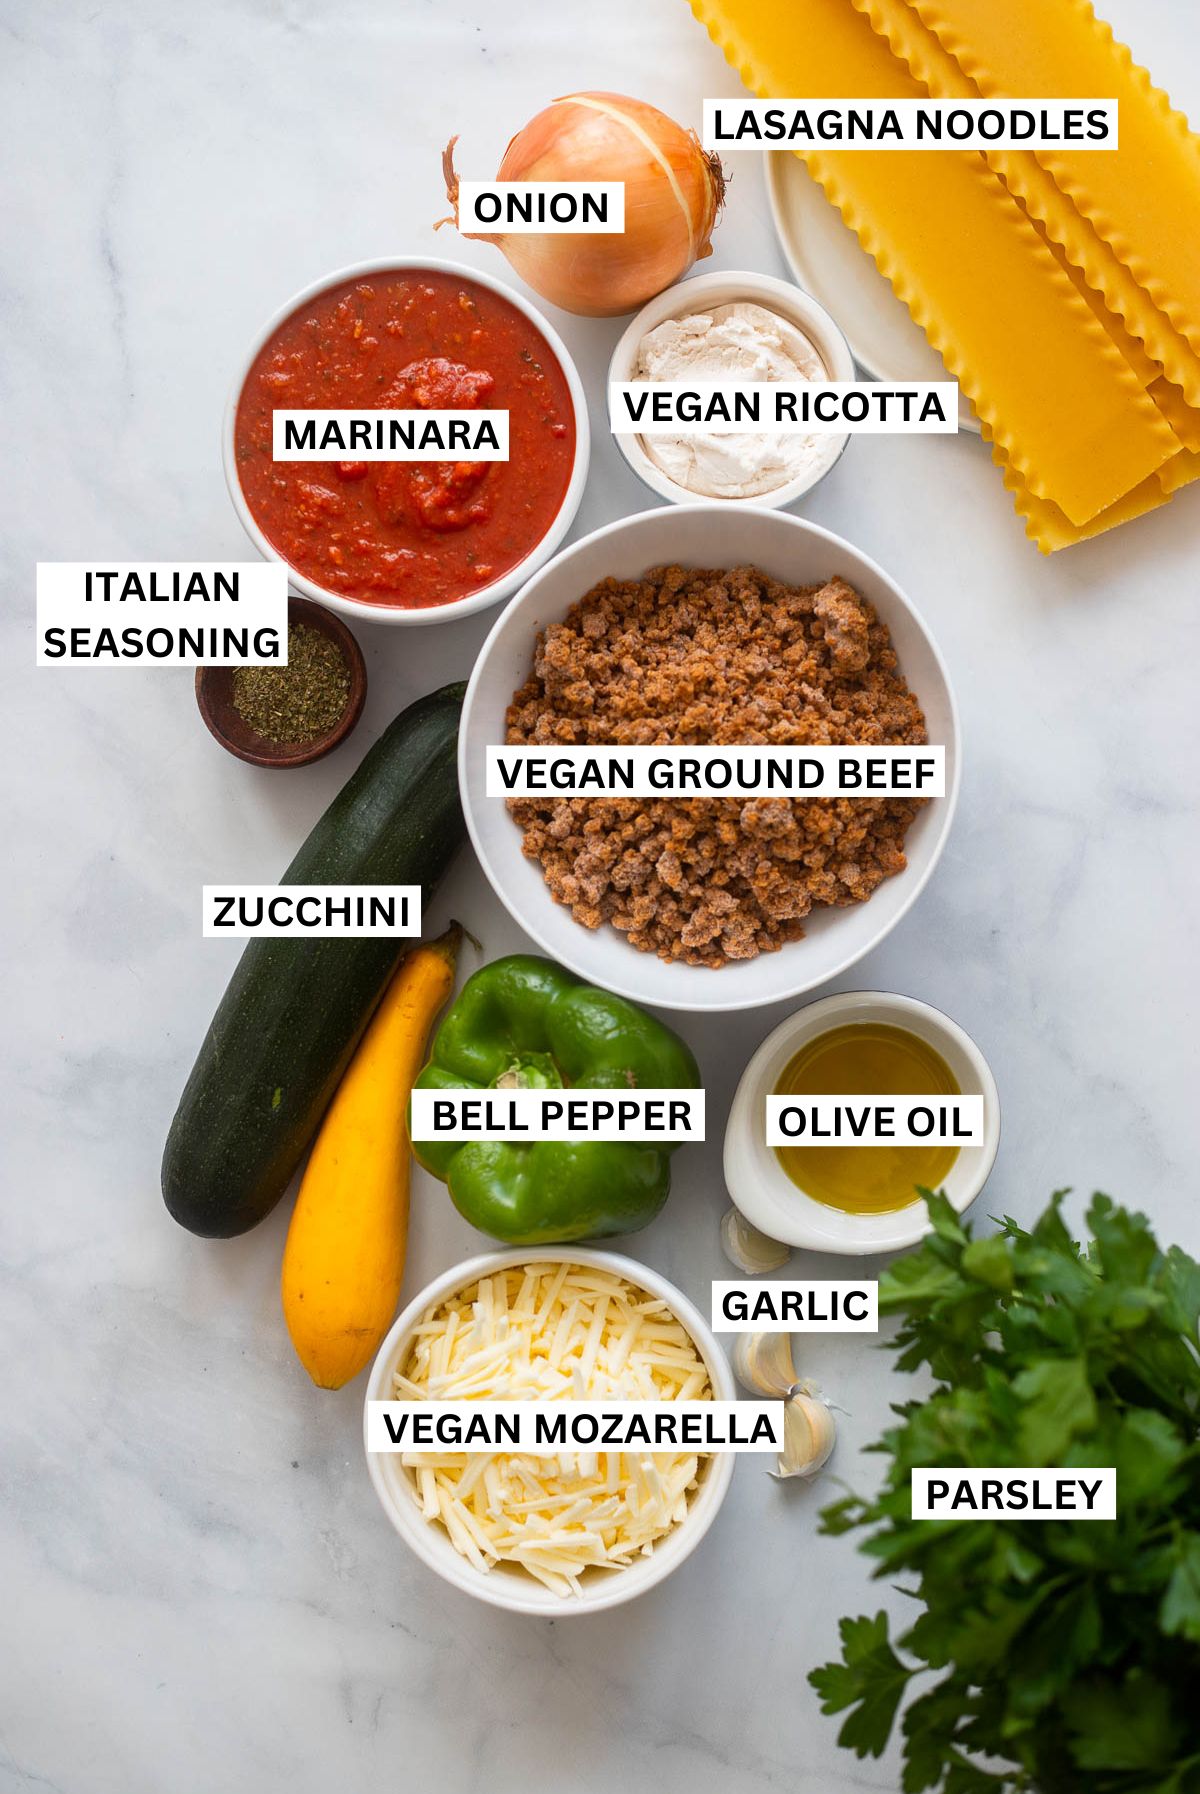 vegan skillet lasagna ingredients in small bowls arranged on table with text overlay for each ingredient.